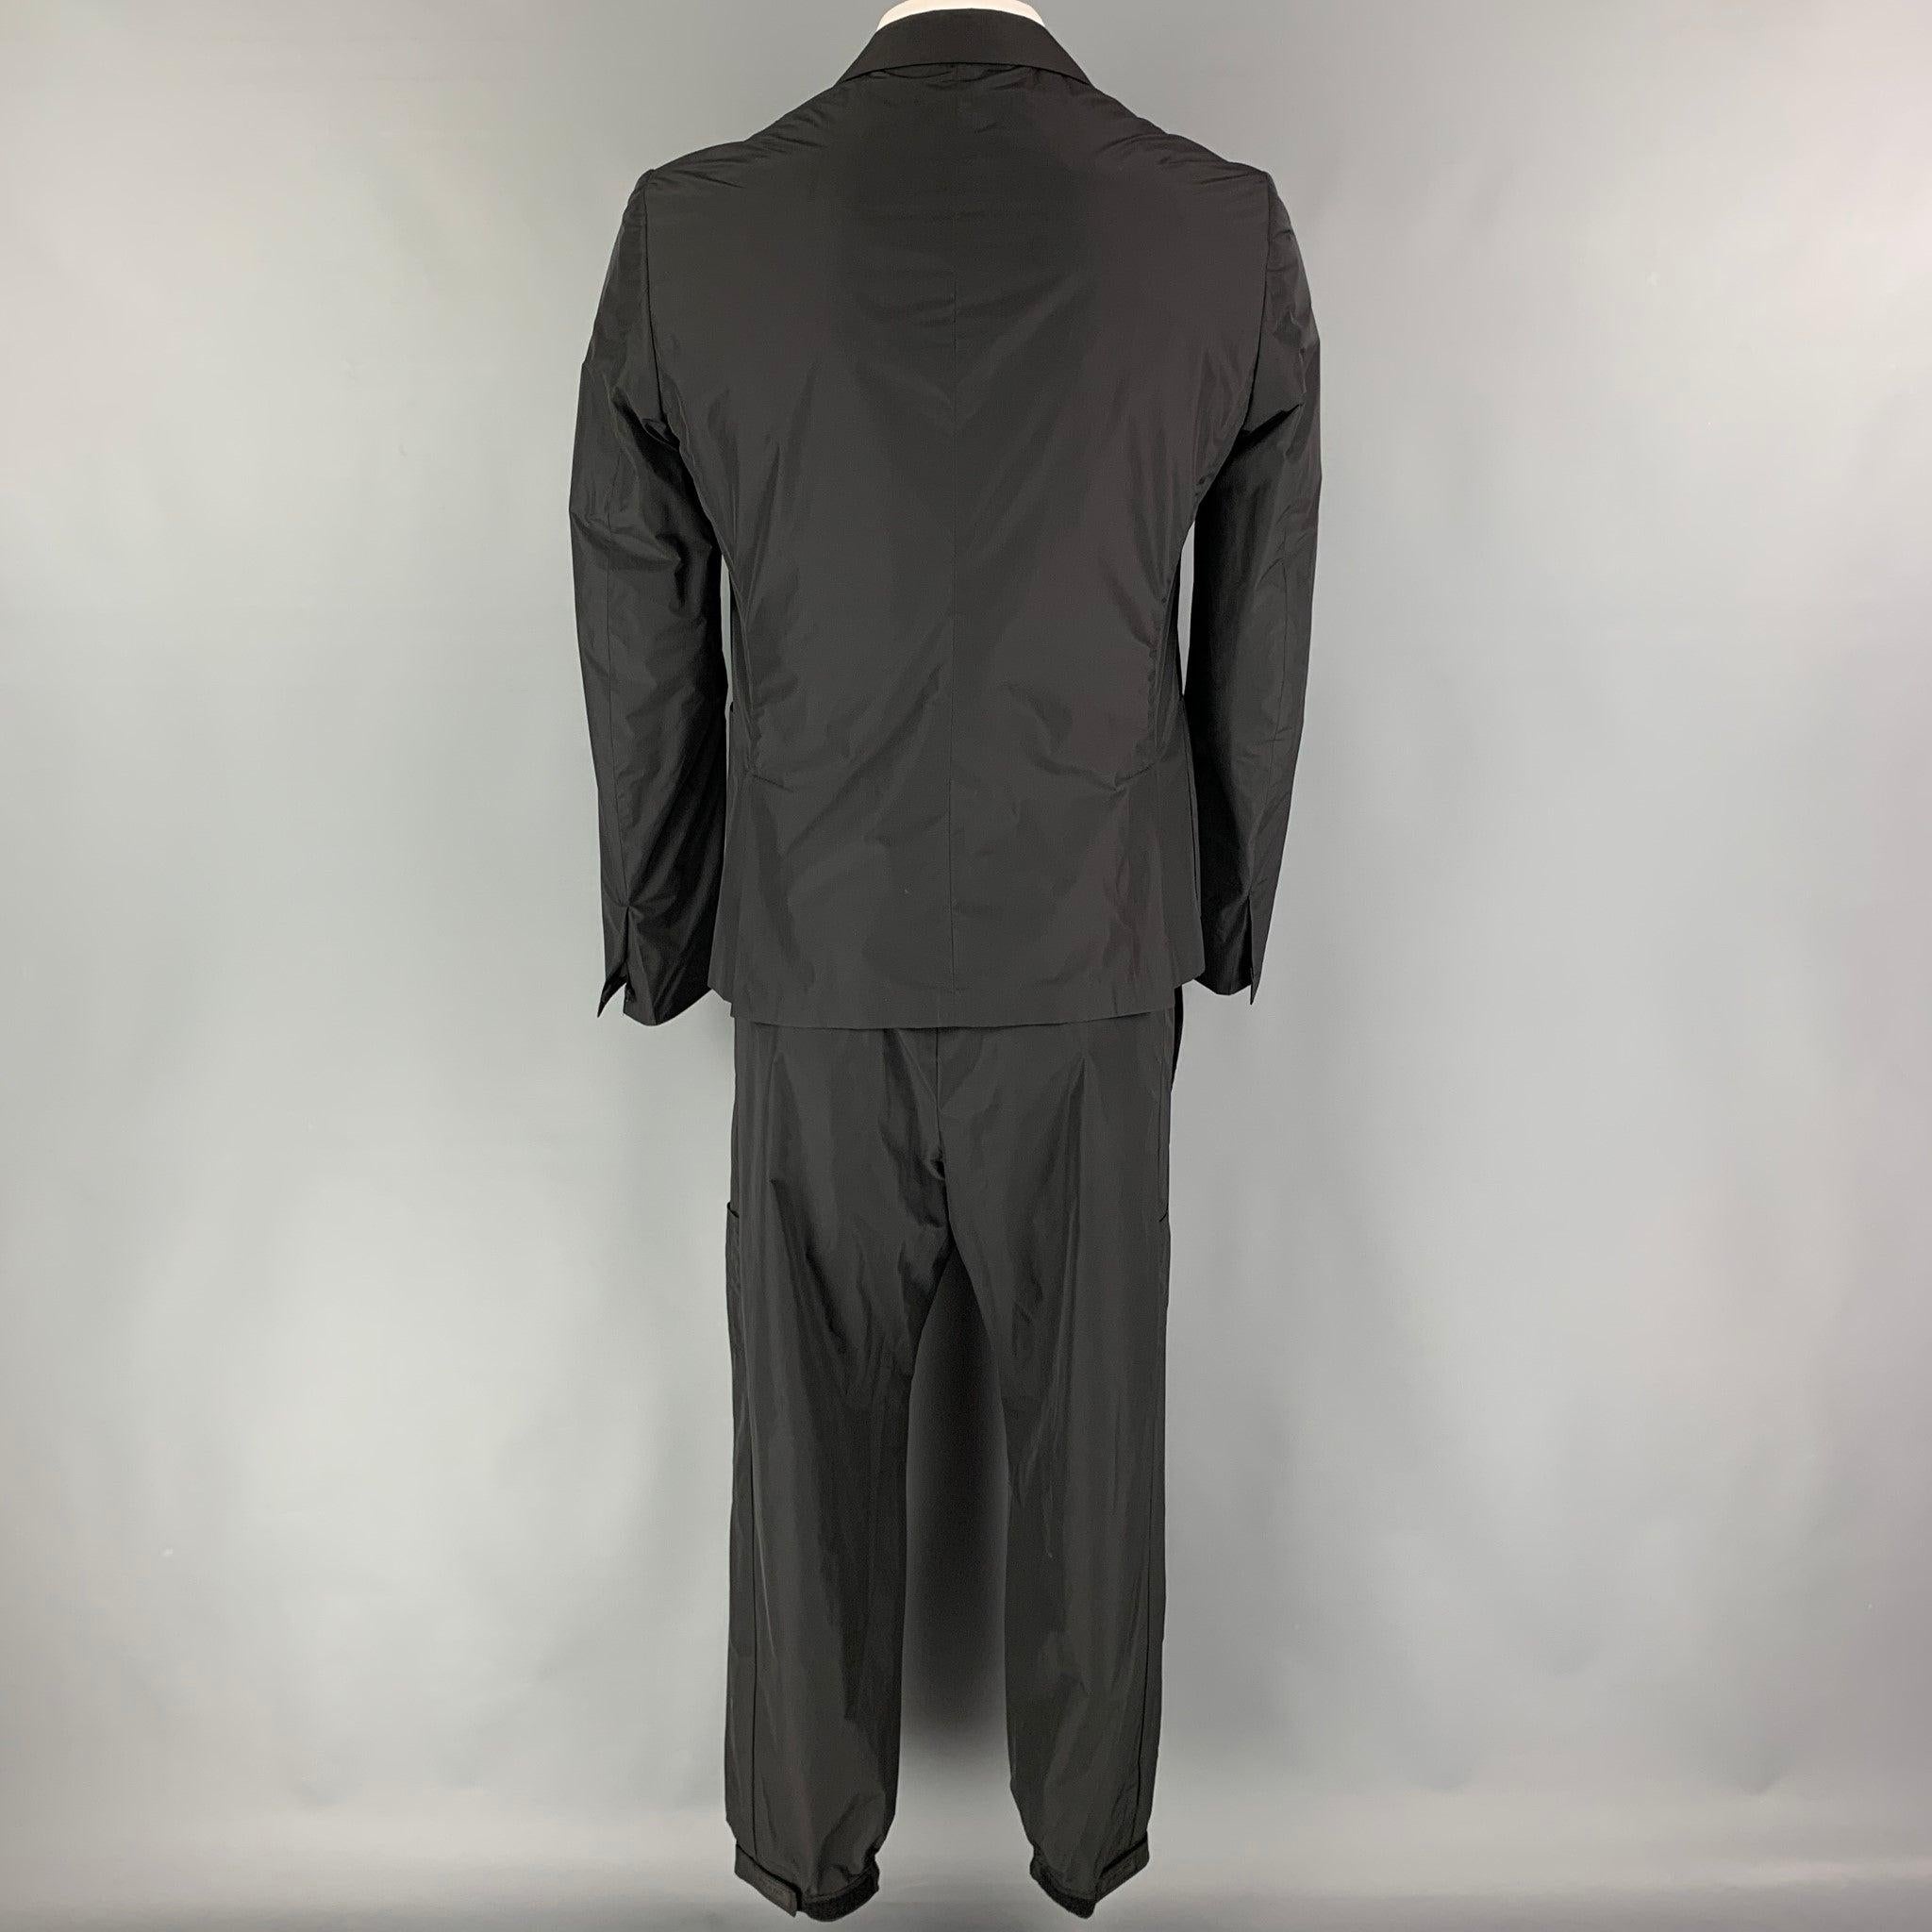 PRADA Size 42 Black Polyester Notch Lapel Suit In Excellent Condition For Sale In San Francisco, CA